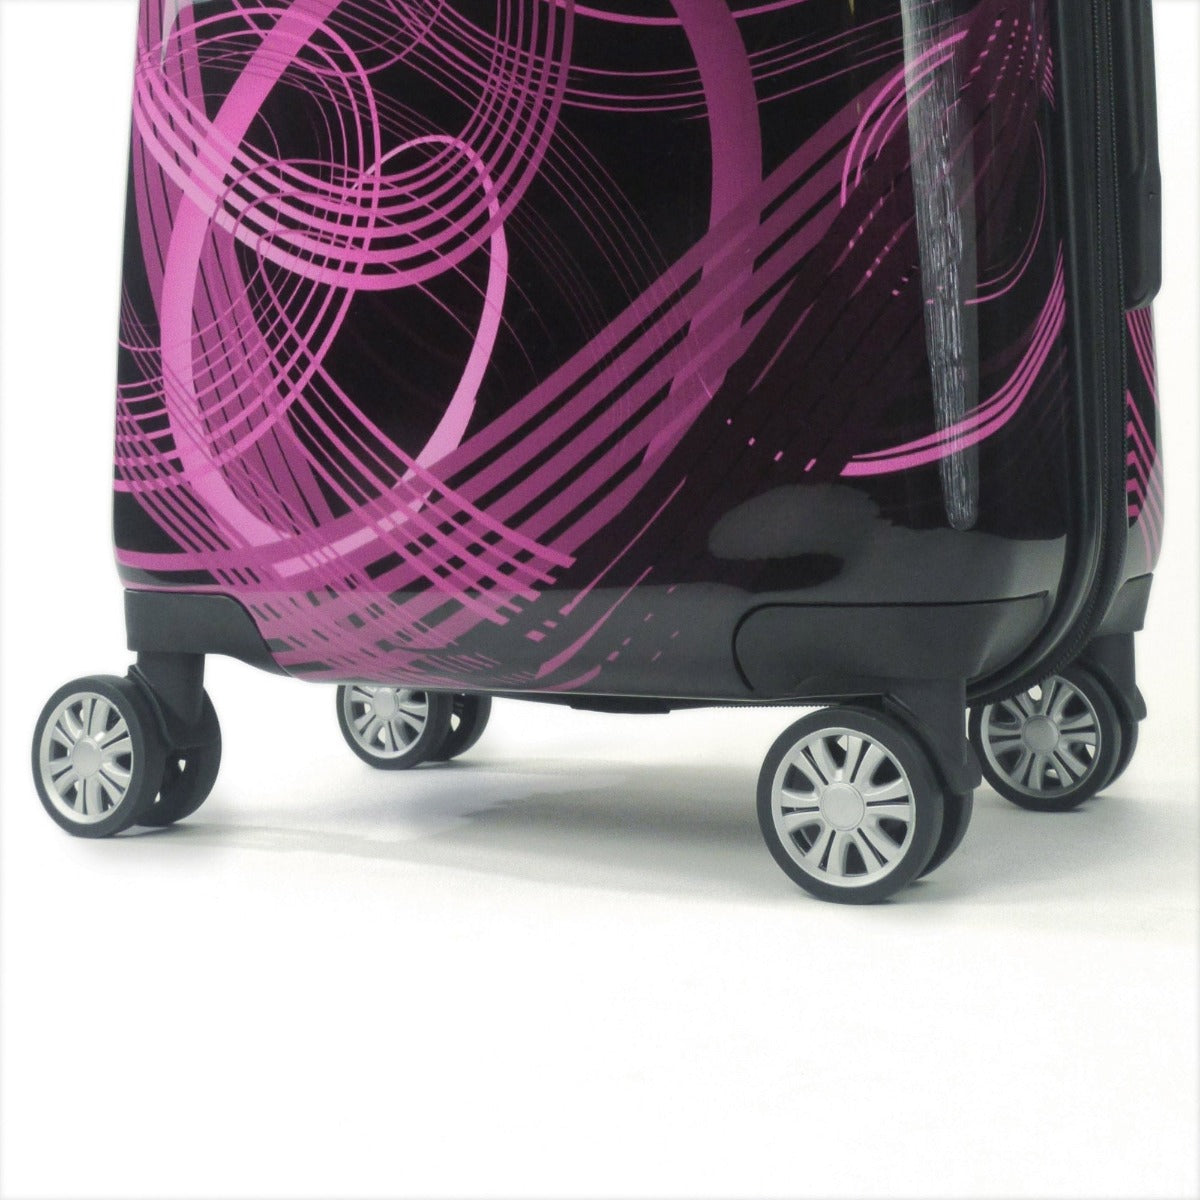 FUL Rolling Luggage Pink Neon Laser 22 inch Carry on Hard Sided 360 Spinner Wheels